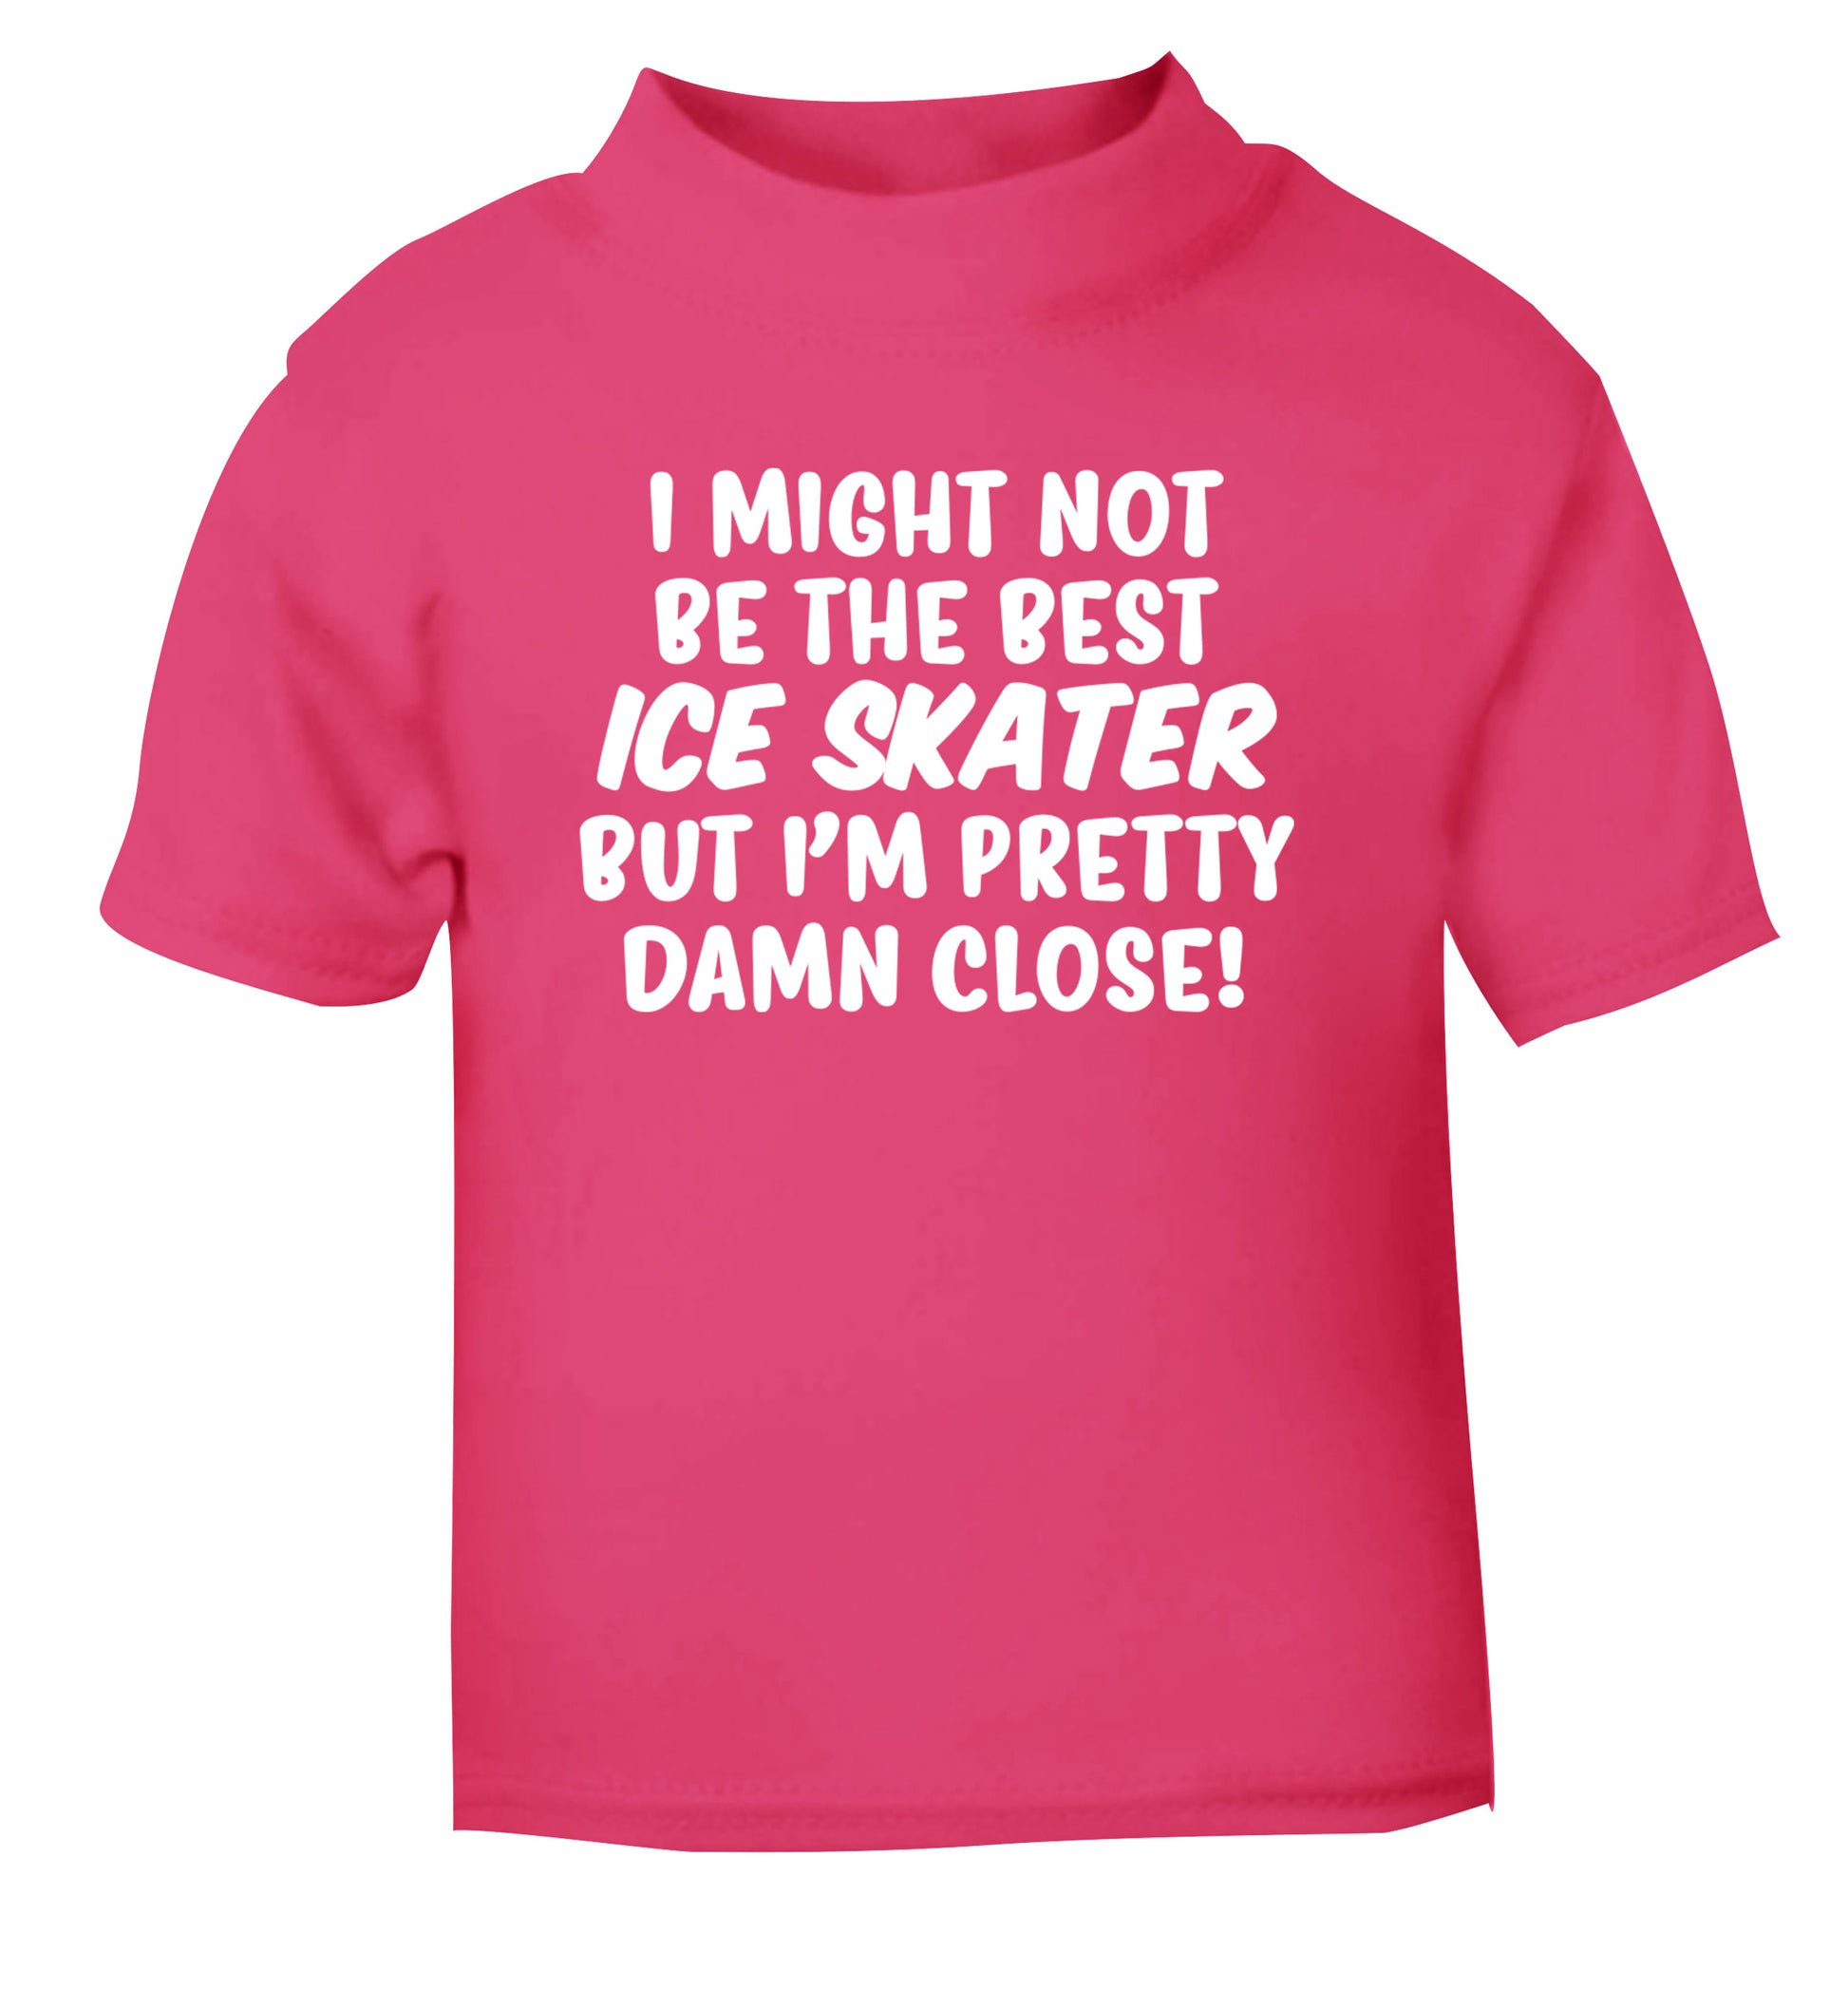 I might not be the best ice skater but I'm pretty damn close! pink Baby Toddler Tshirt 2 Years